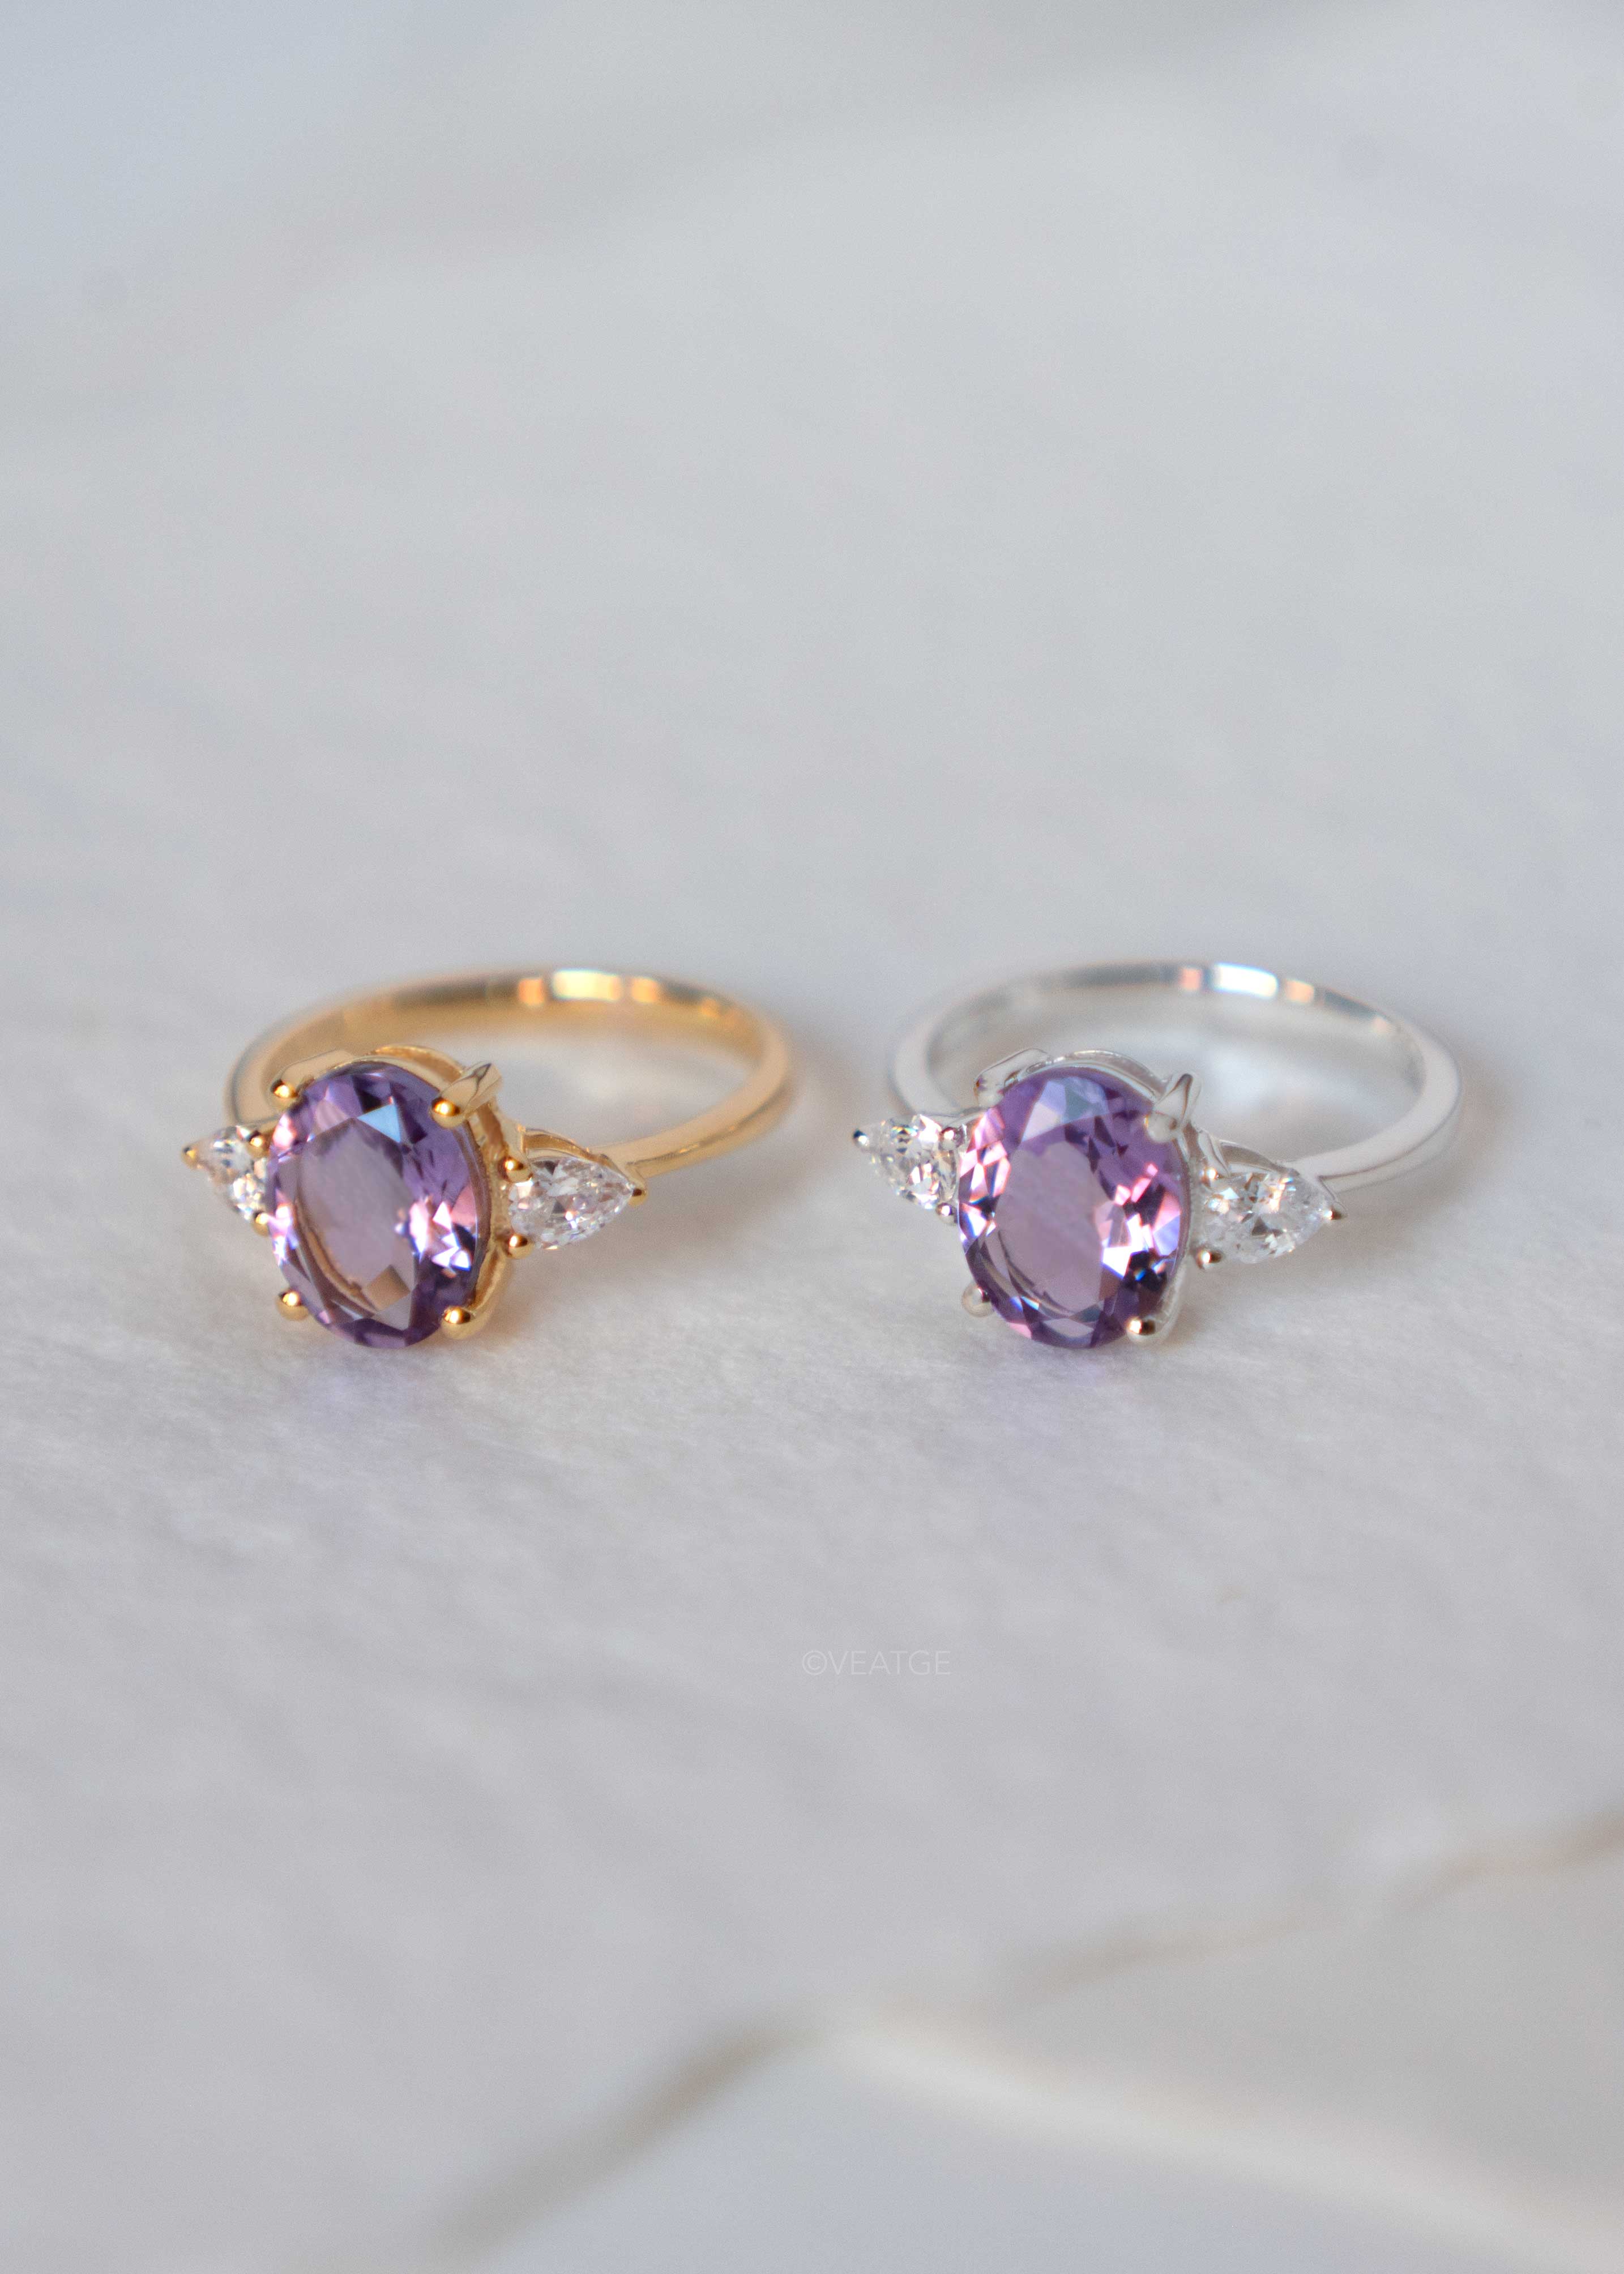 Amethyst Ring 925 Sterling Silver Gold Engagement Proposal Anniversary Birthday February Birthstone Ring Rings Gifts for Women Girlfriend Promise Rings Florence